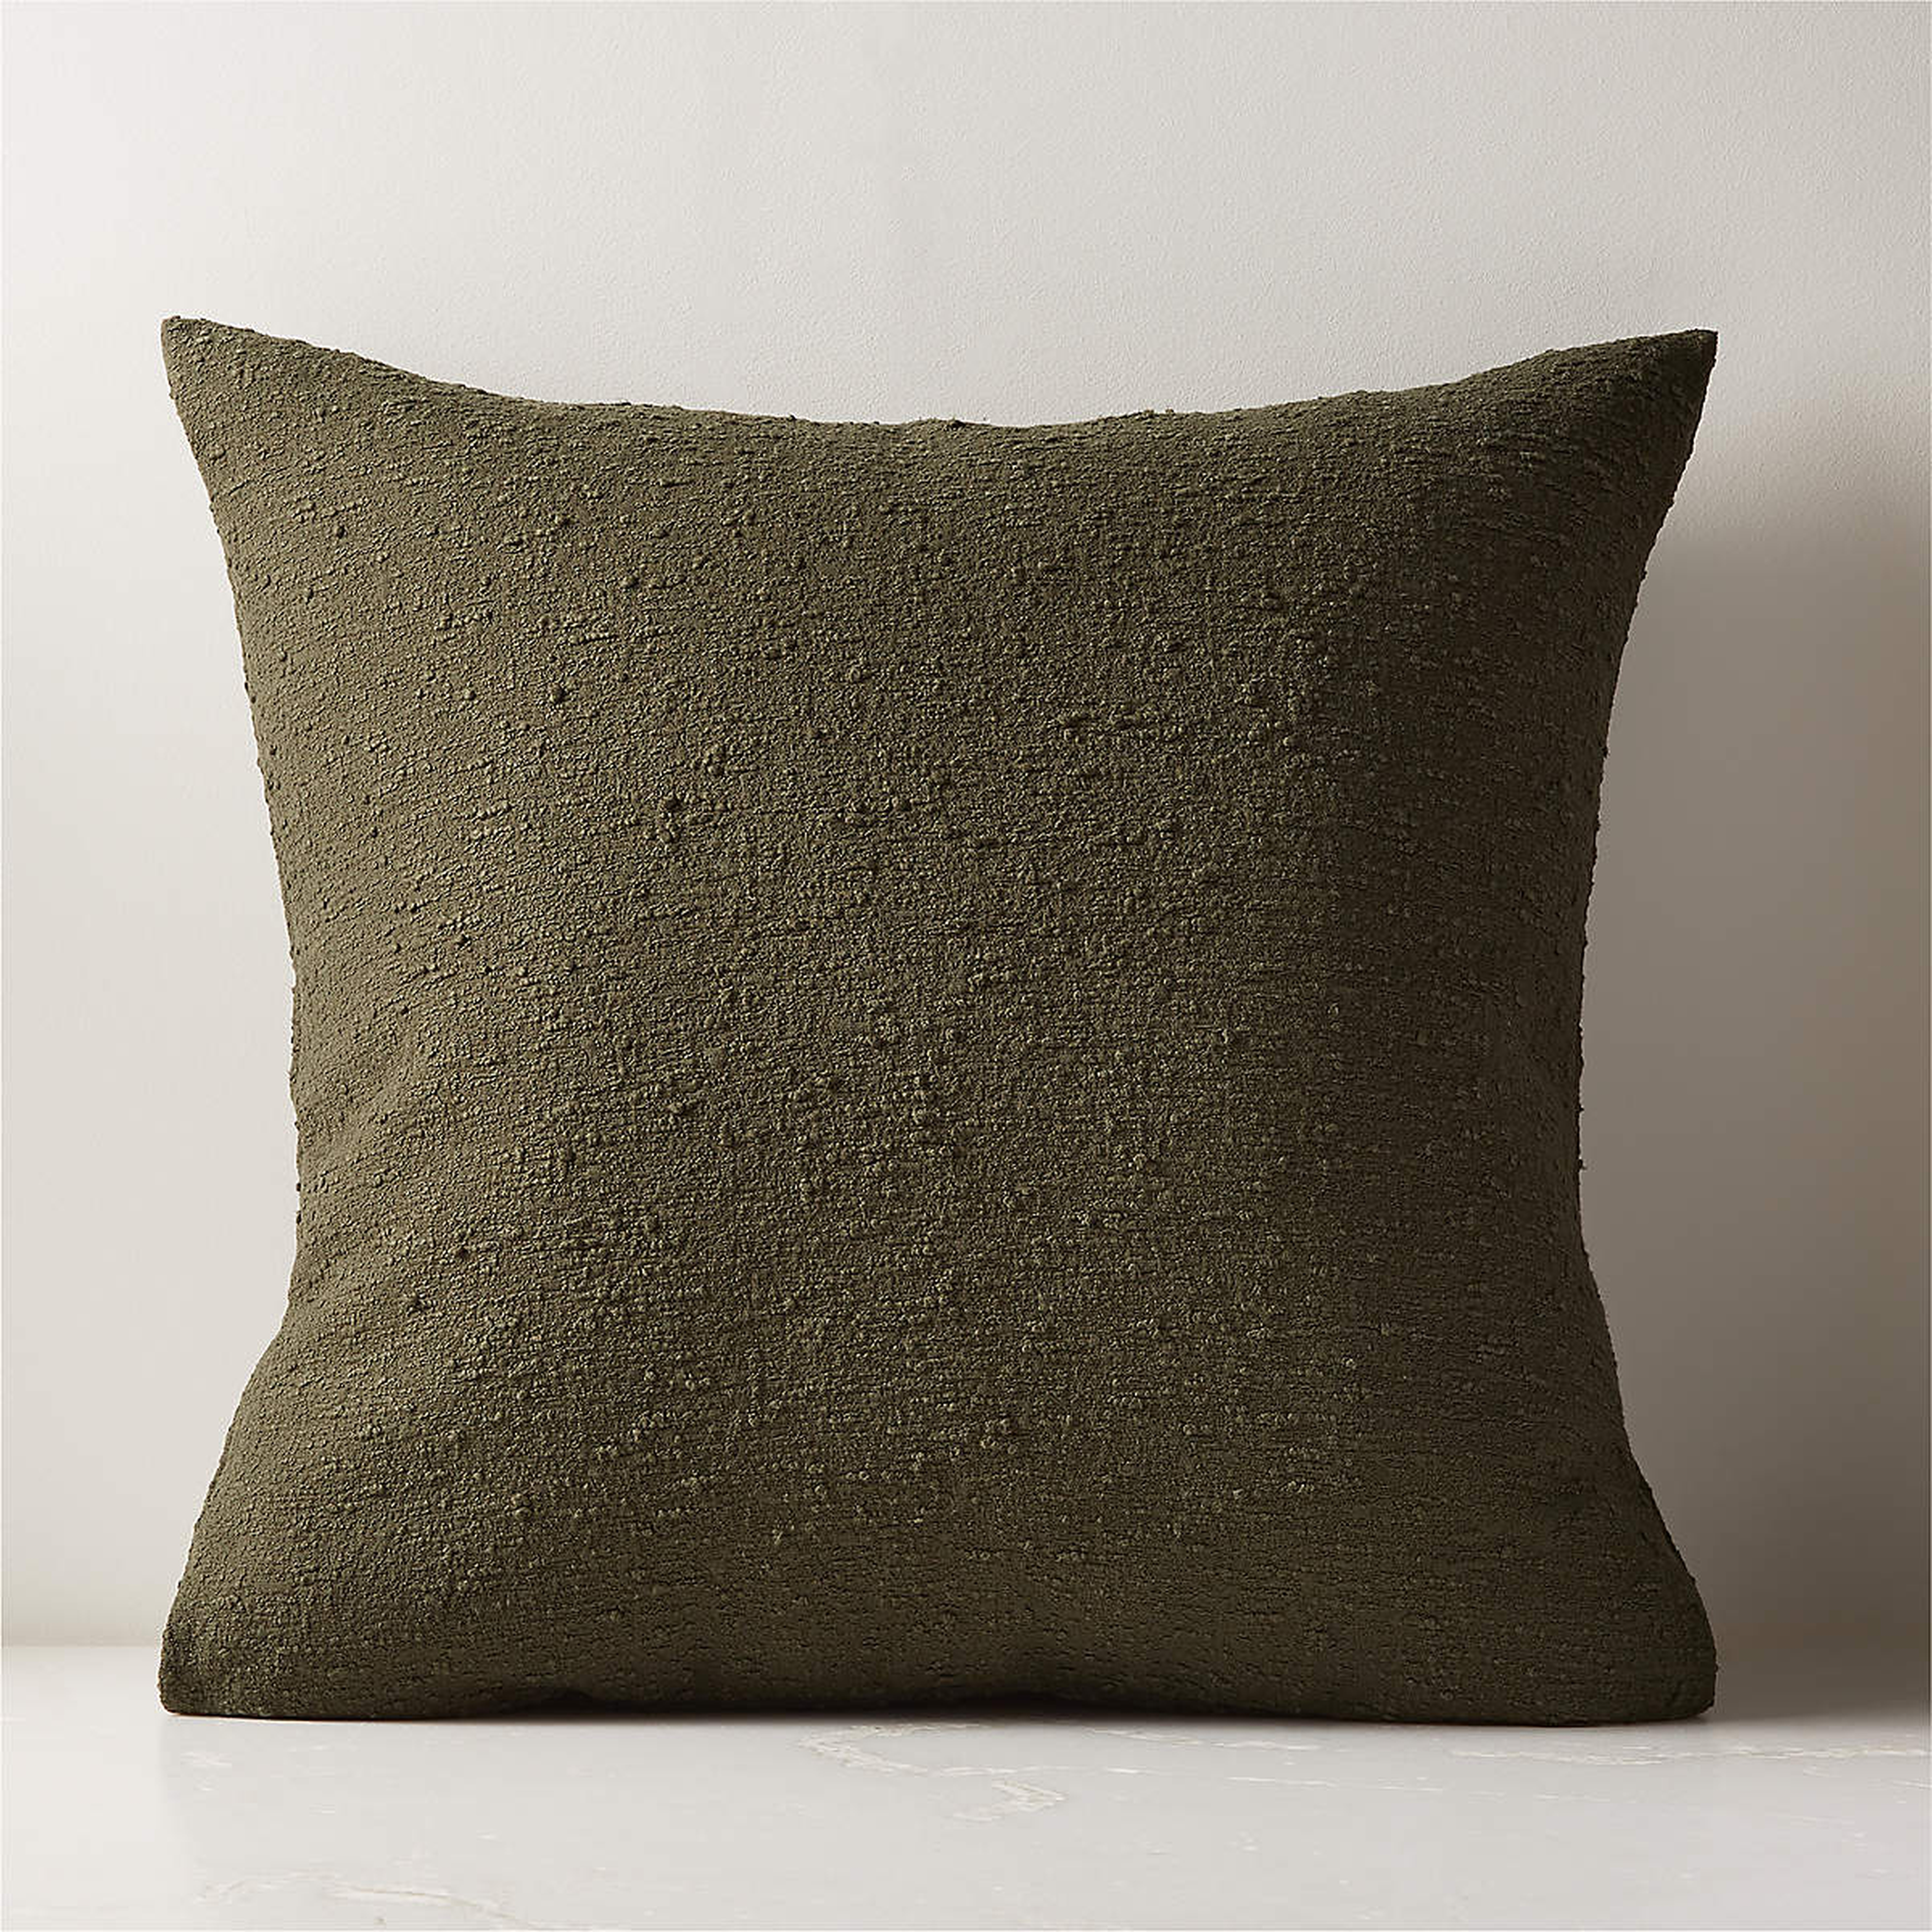 23" FOREST NIGHT BOUCLE THROW PILLOW WITH DOWN-ALTERNATIVE INSERT - CB2